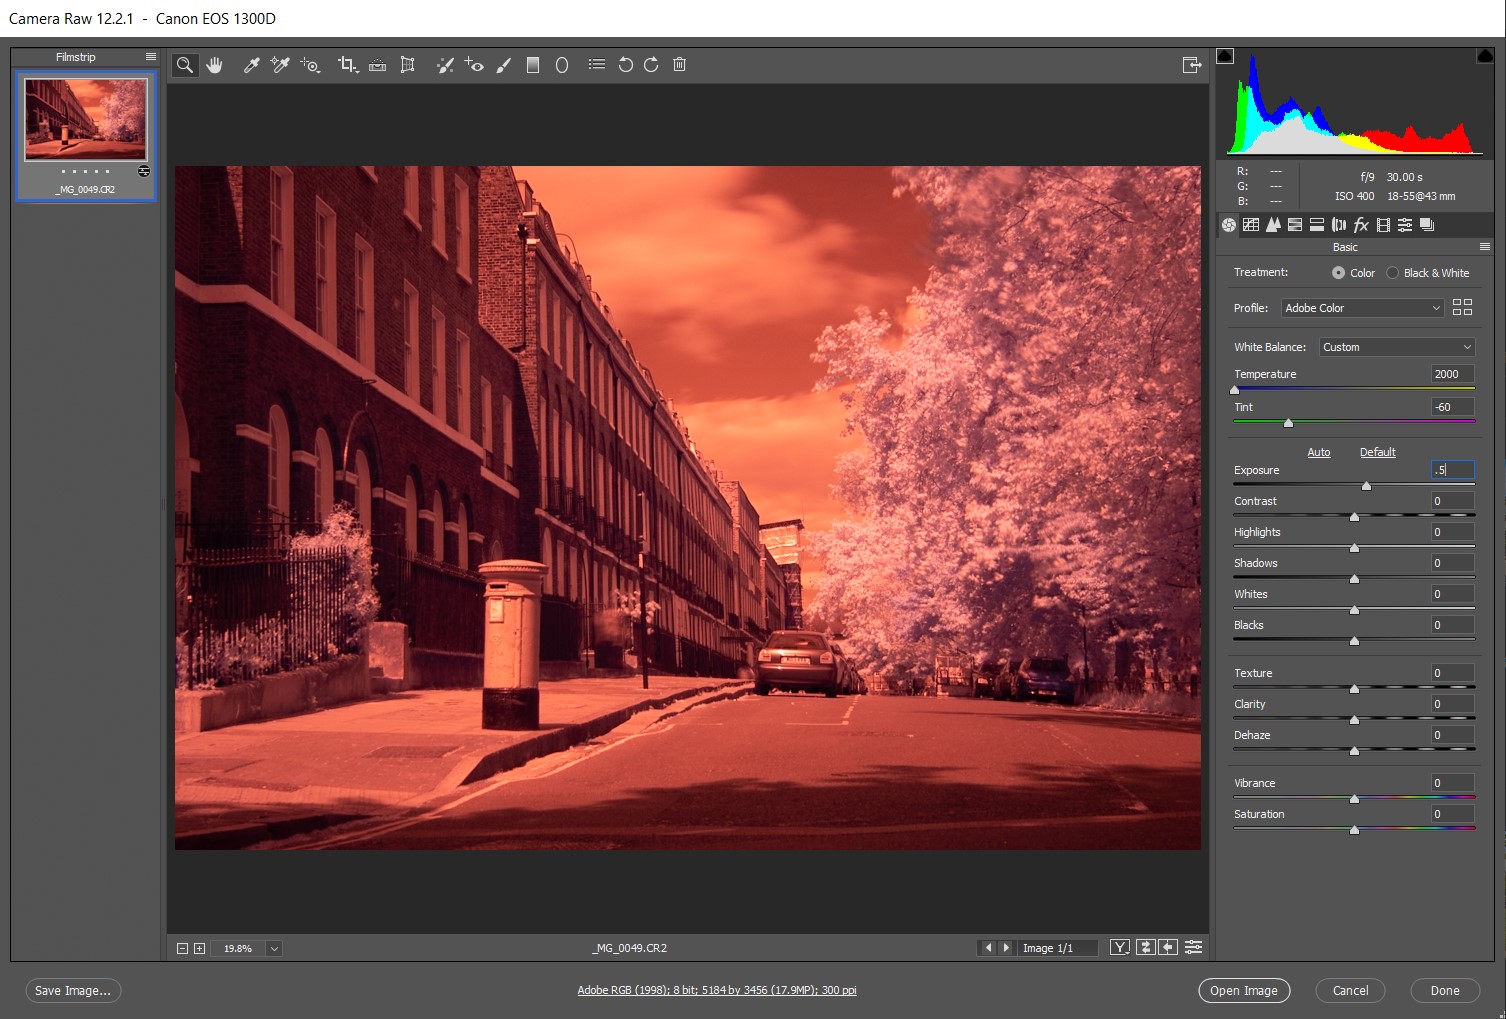 Infrared Photography With Filter on DSLR. Colour infrared opened in "Camera RAW" has a red colour cast.